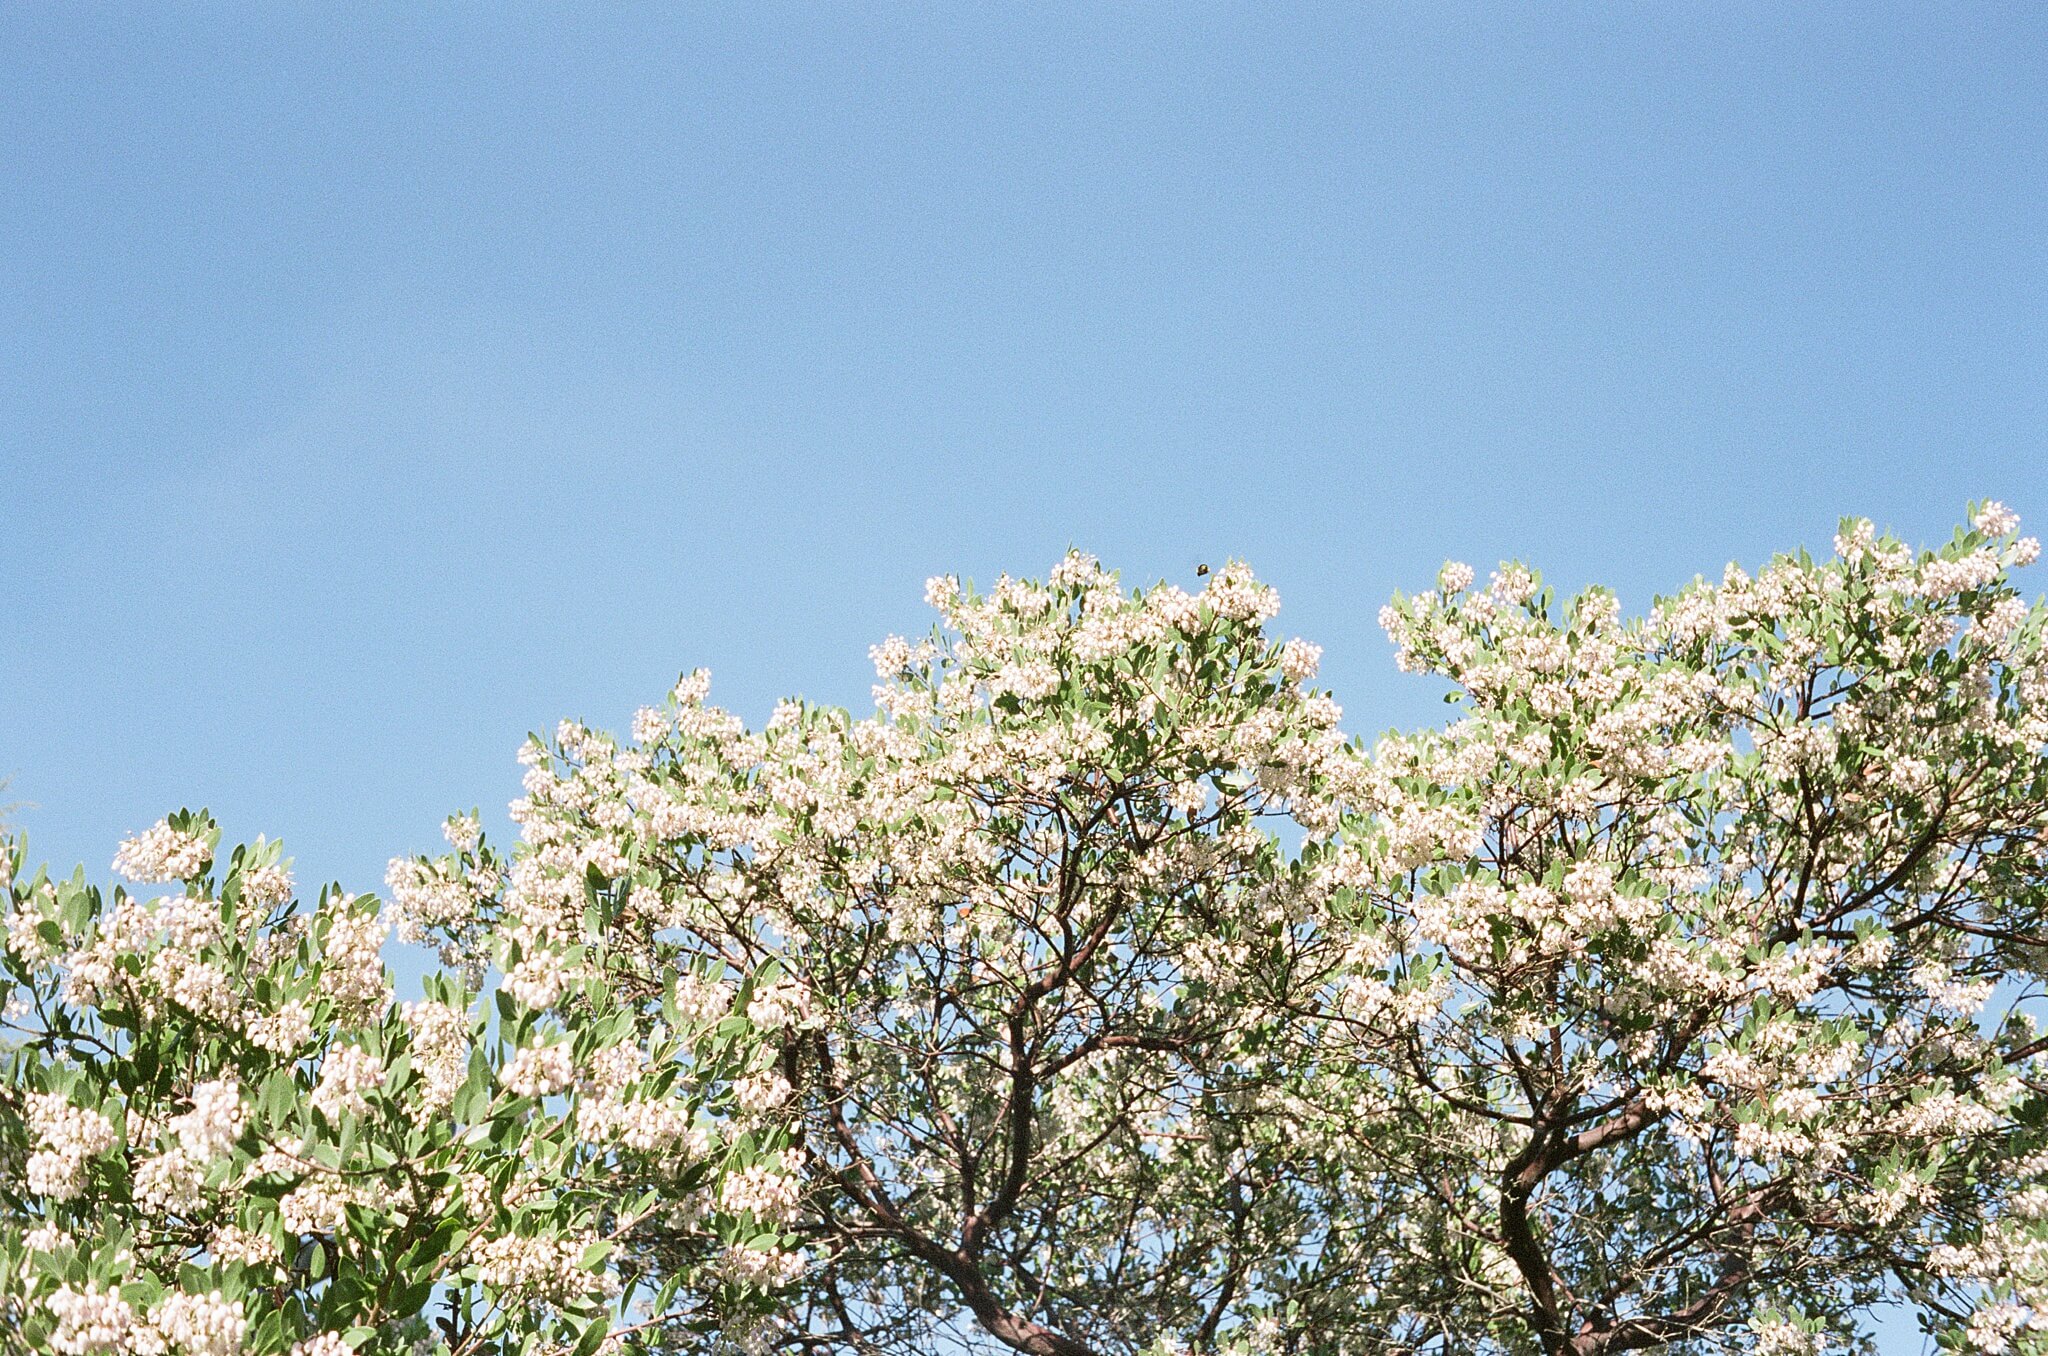 roller 35 sample image. A tree full of tiny white flowers reaches towards the sunlight against a bright blue sky.